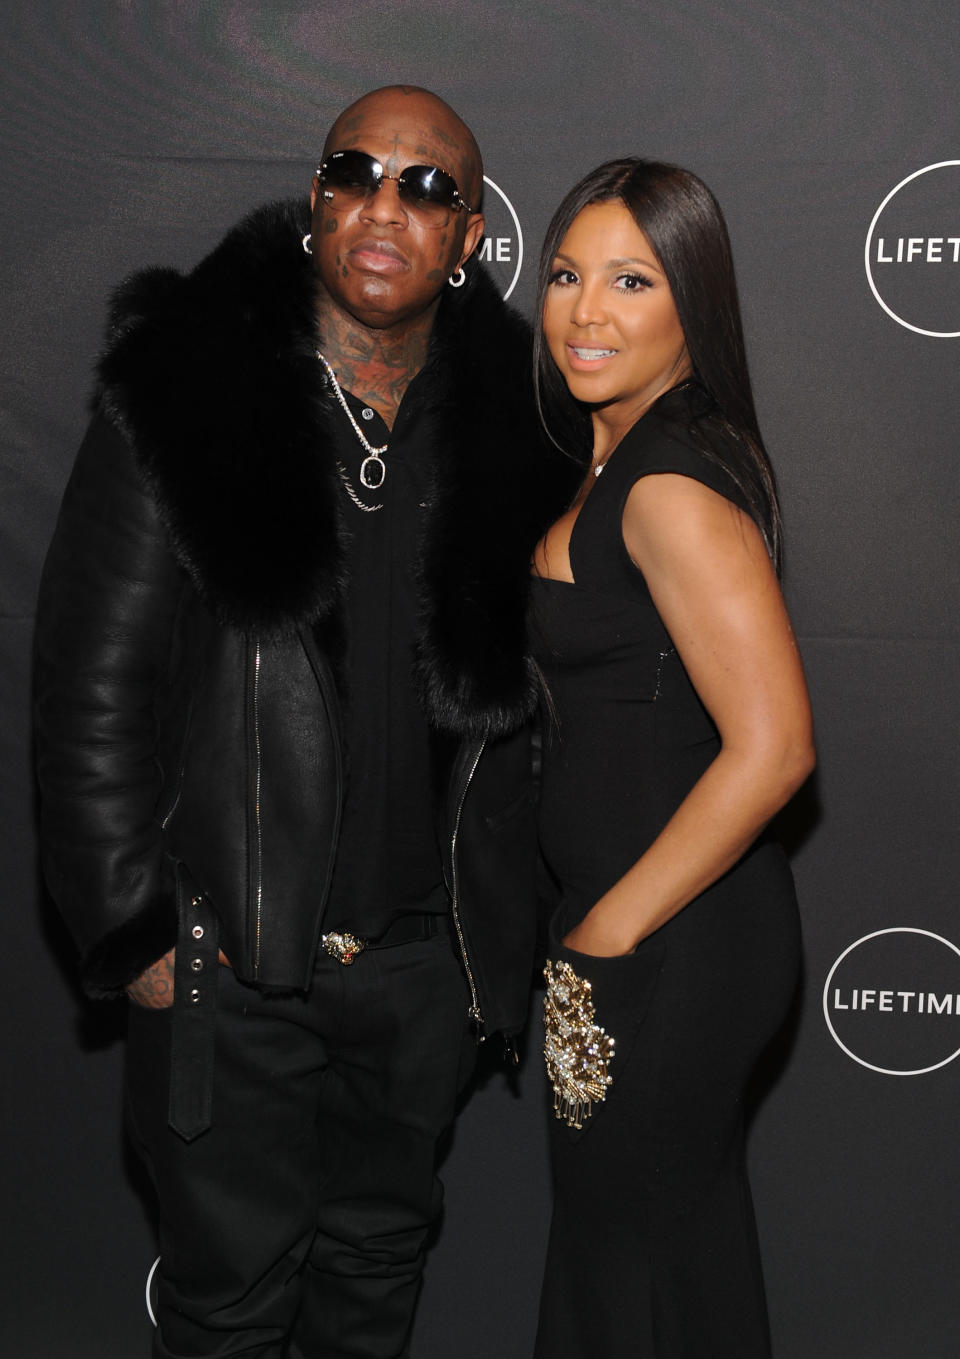 Two people posing together, one in a fur-trimmed jacket, the other in a fitted dress, at a Lifetime event